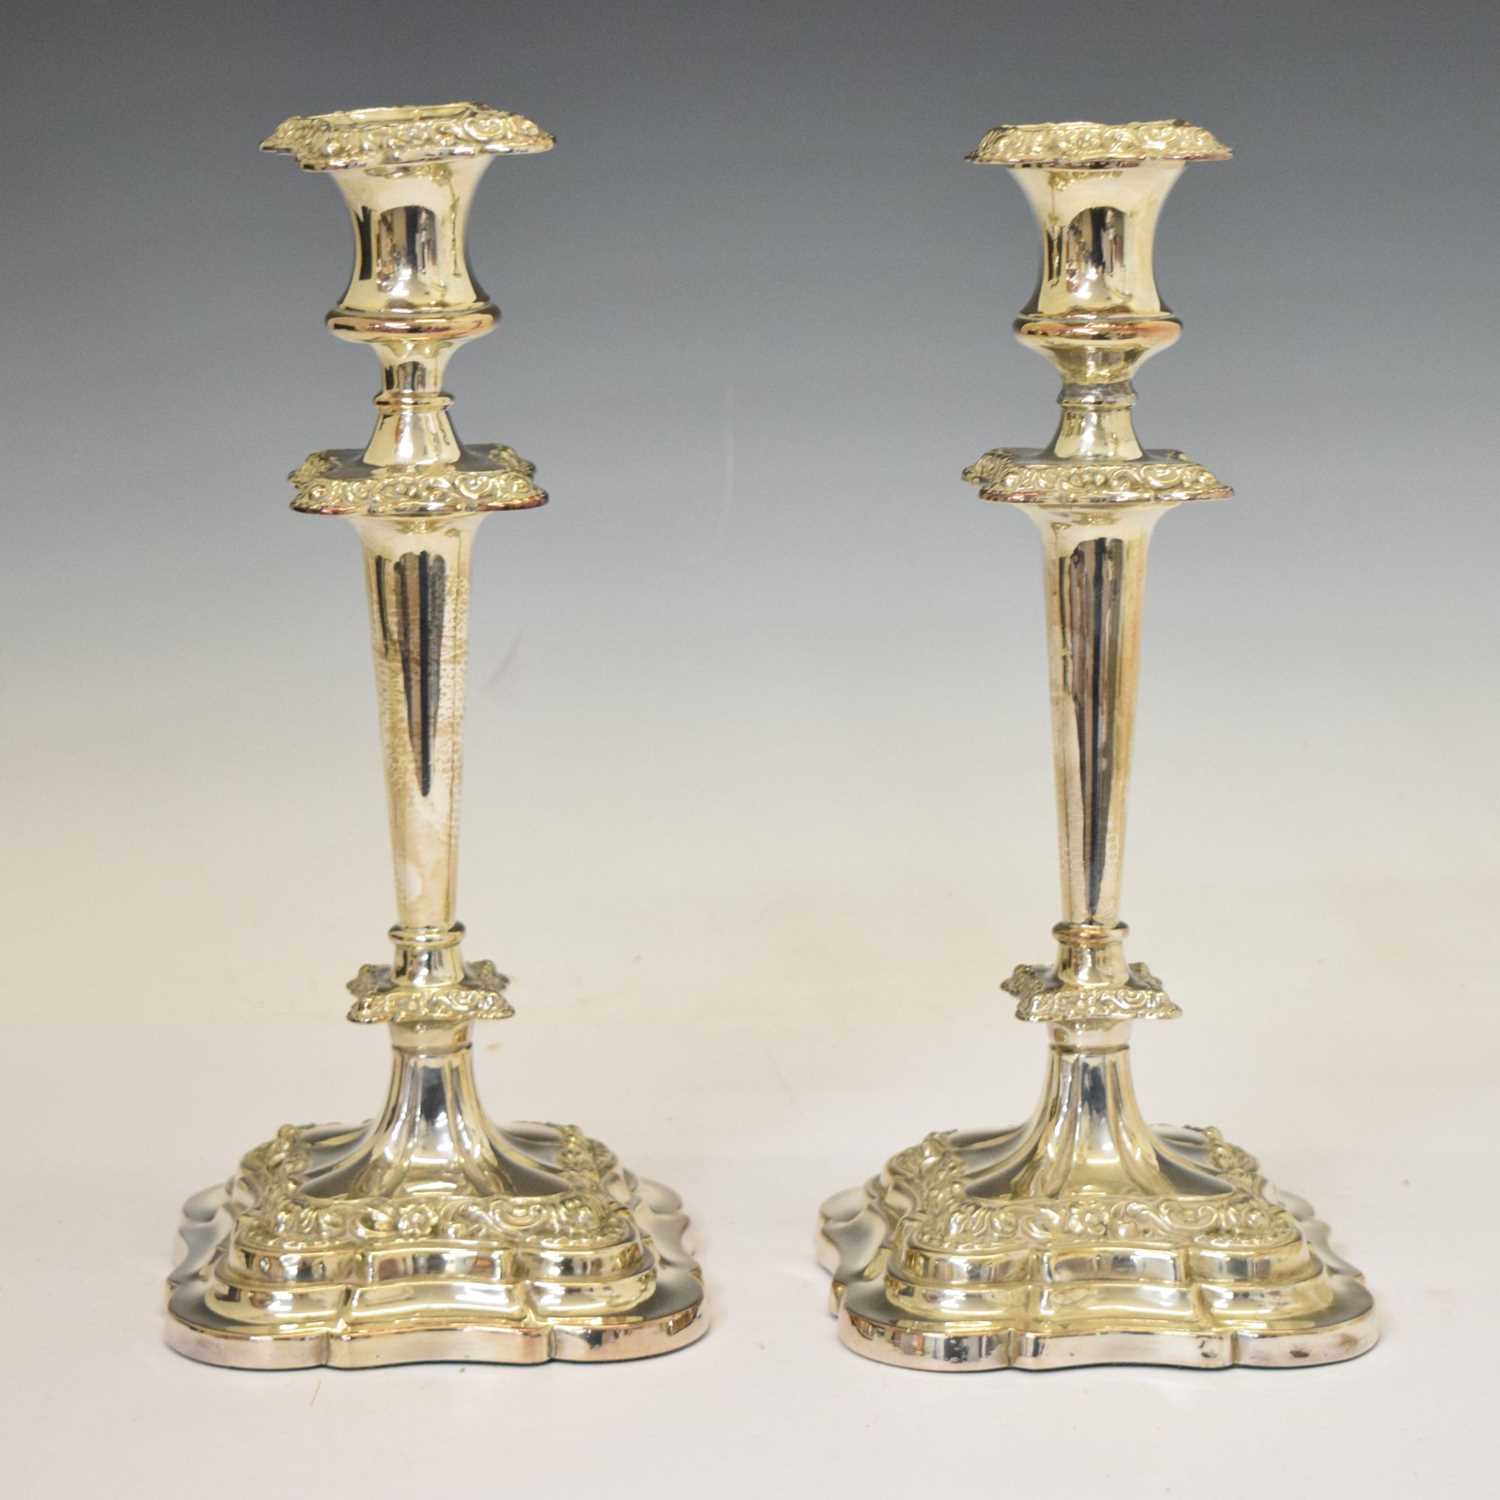 Pair of 19th century silver plated on copper candlesticks